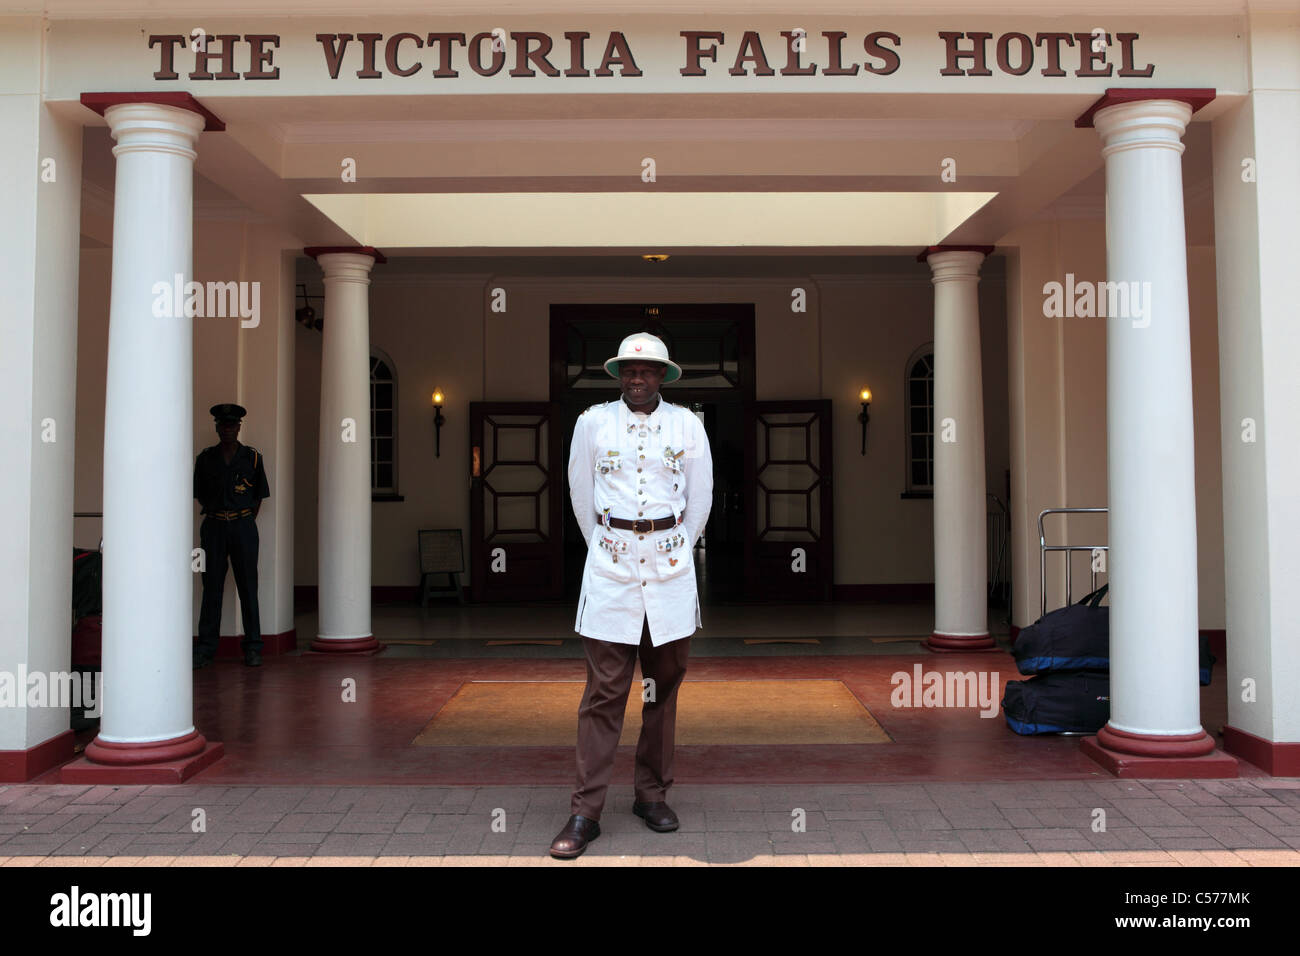 The smiling concierge at the Victoria Falls Hotel, Zimbabwe. Stock Photo